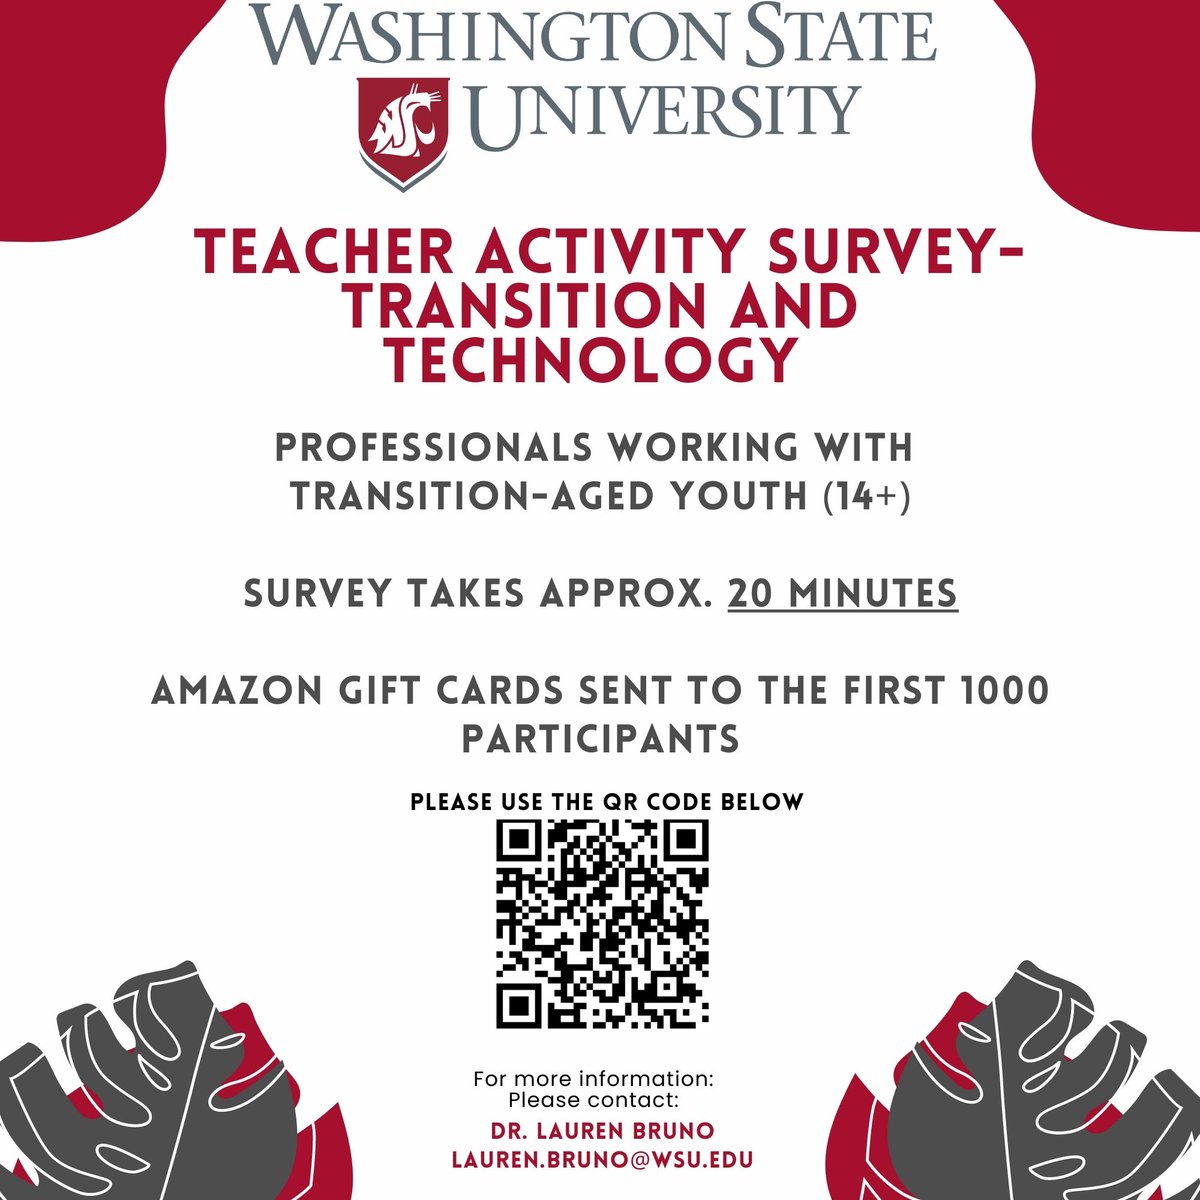 As @ijonmes , we are happy to announce a call by @LaurenPbruno to participate in an important study regarding the use of the Teacher Activity Survey-Transition and Technology (TASTT). This survey aims to evaluate teachers' self-efficacy in evidence-based transition practices and…